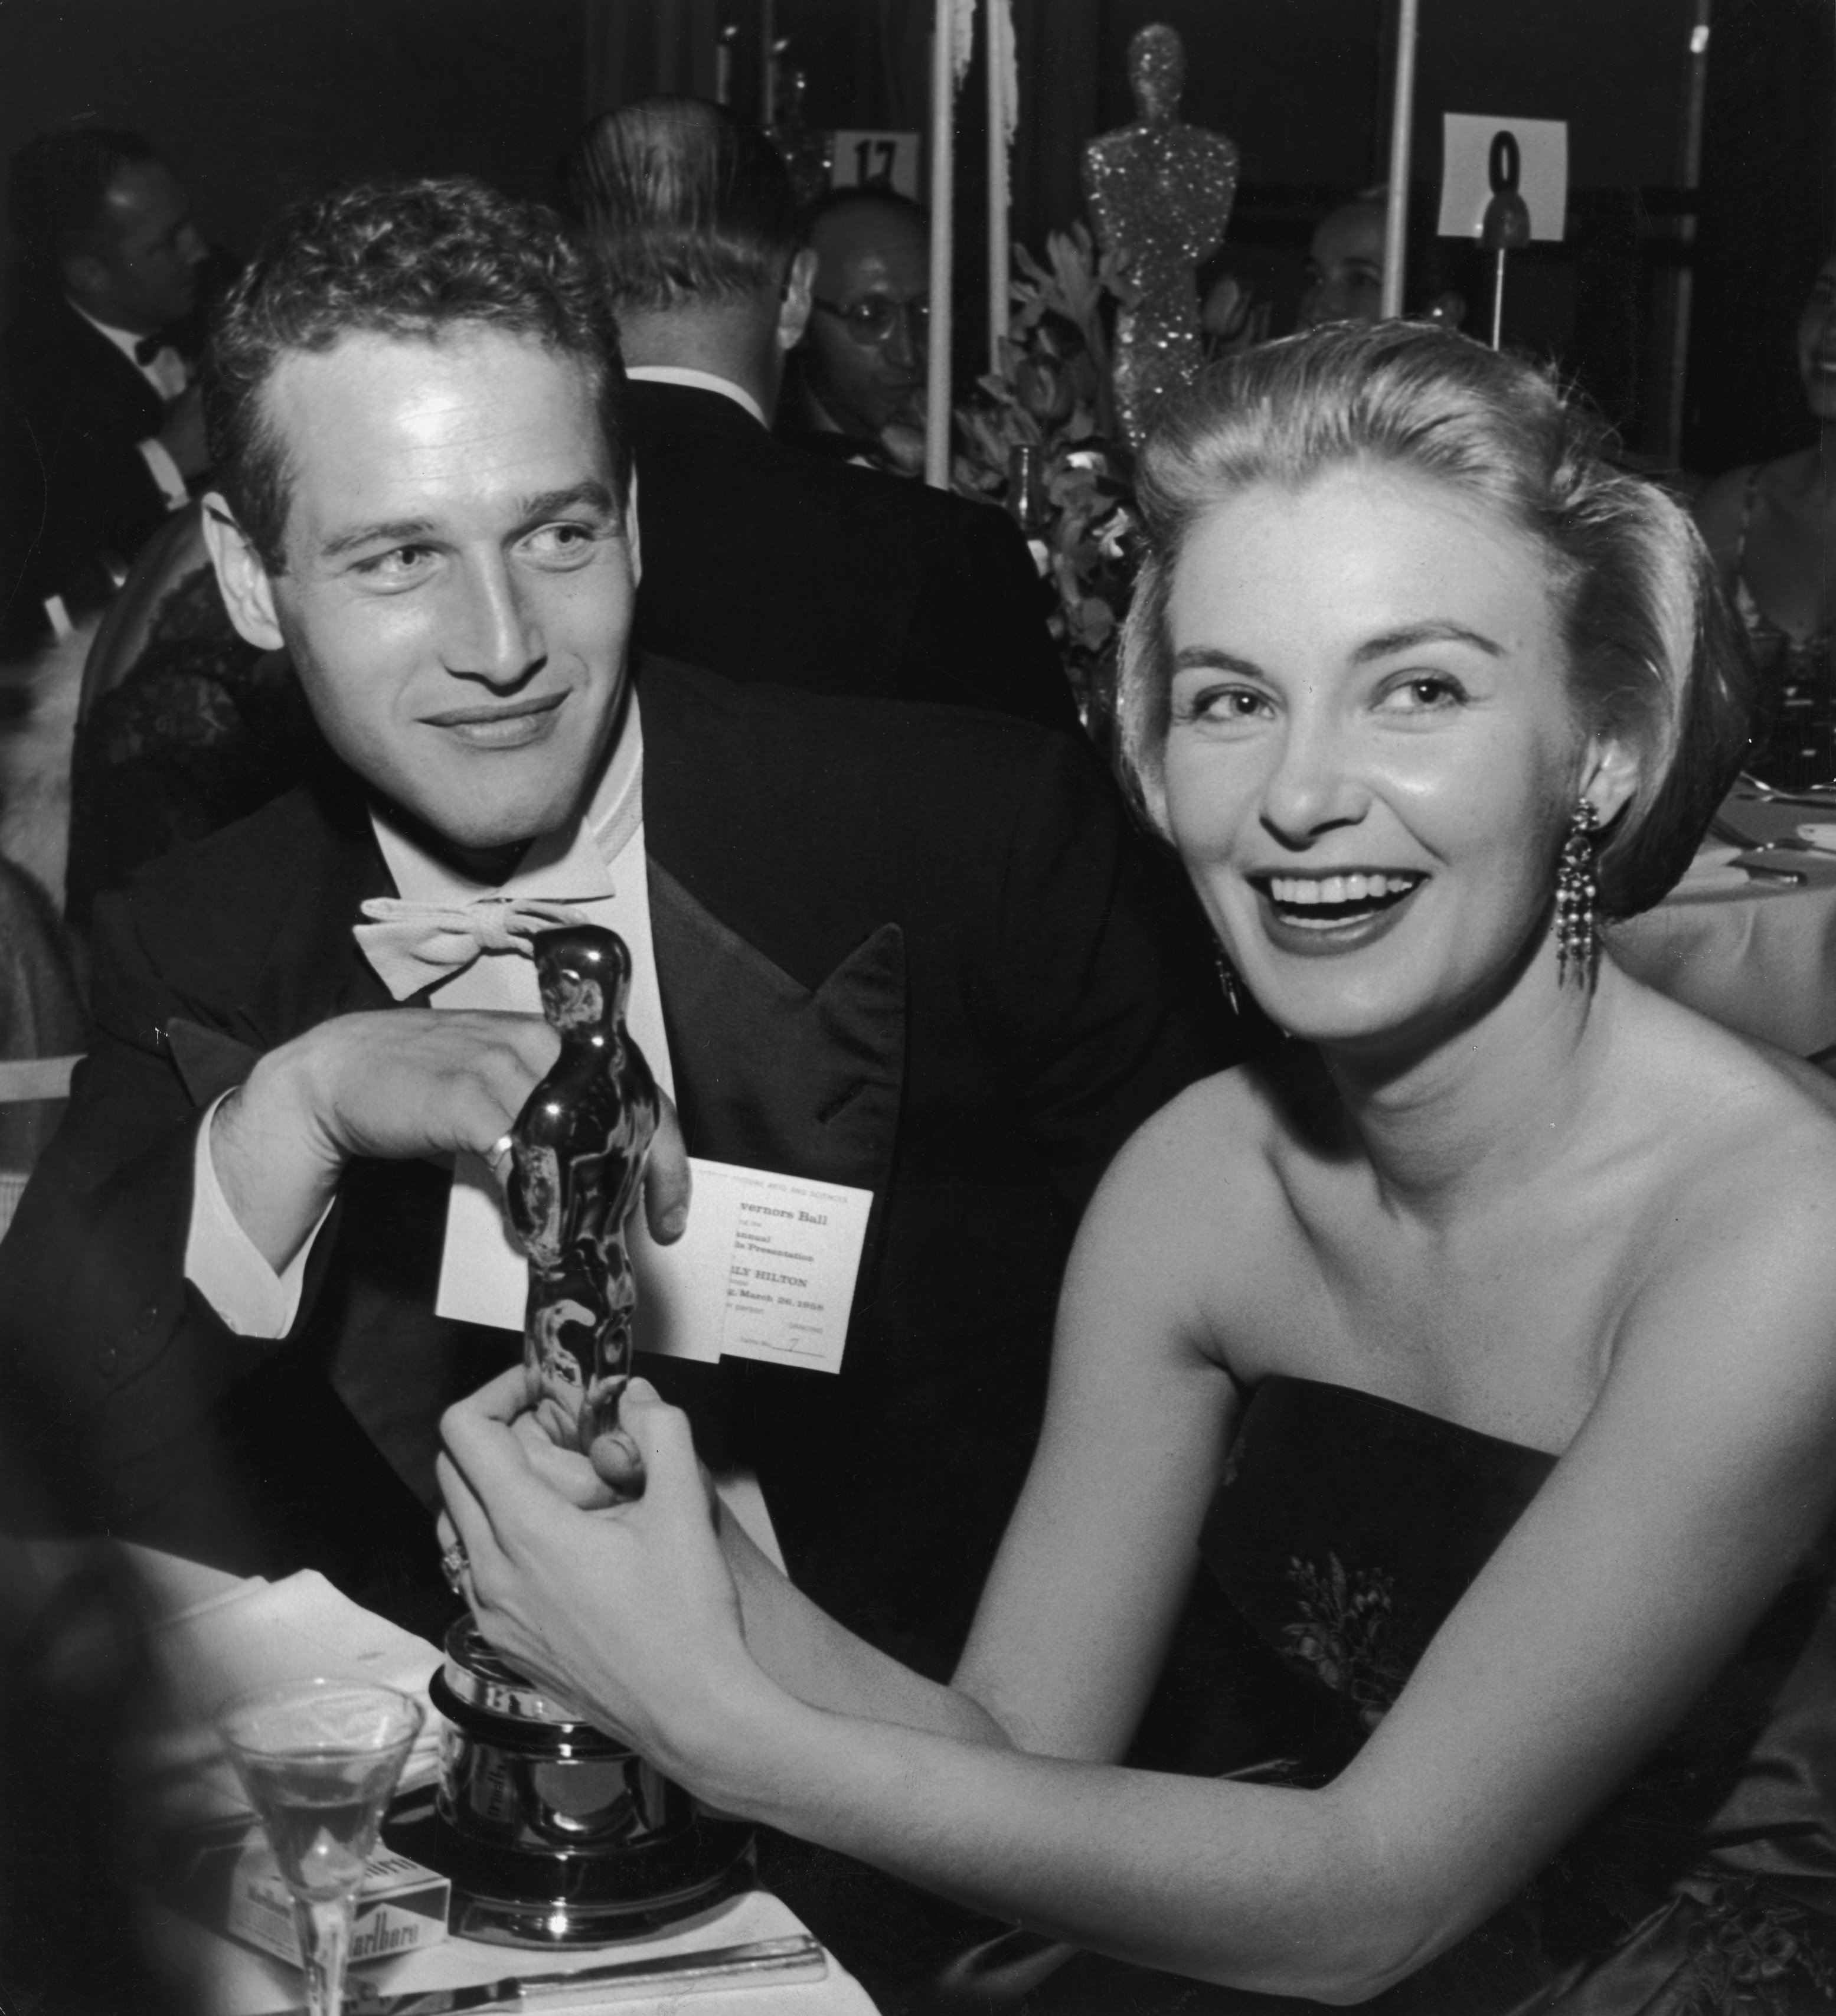 American actor Joanne Woodward holds her Oscar statuette while sitting next to husband, American actor Paul Newman in 1958 | Source: Getty Images